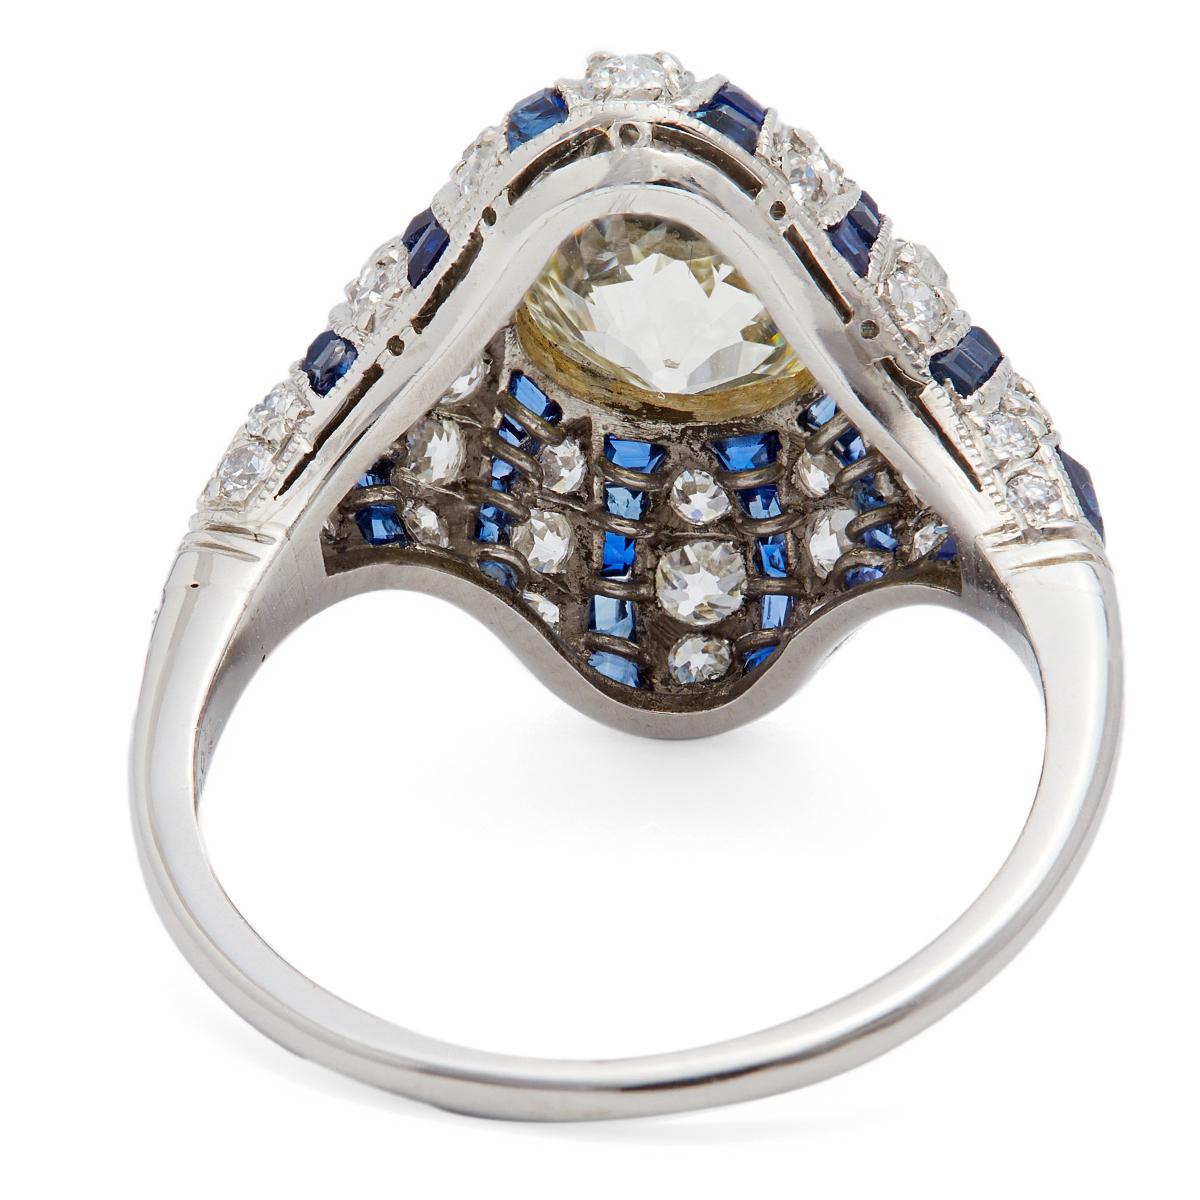 Art Deco Inspired 1.86 Carat Diamond and Sapphire Platinum Ring For Sale 1